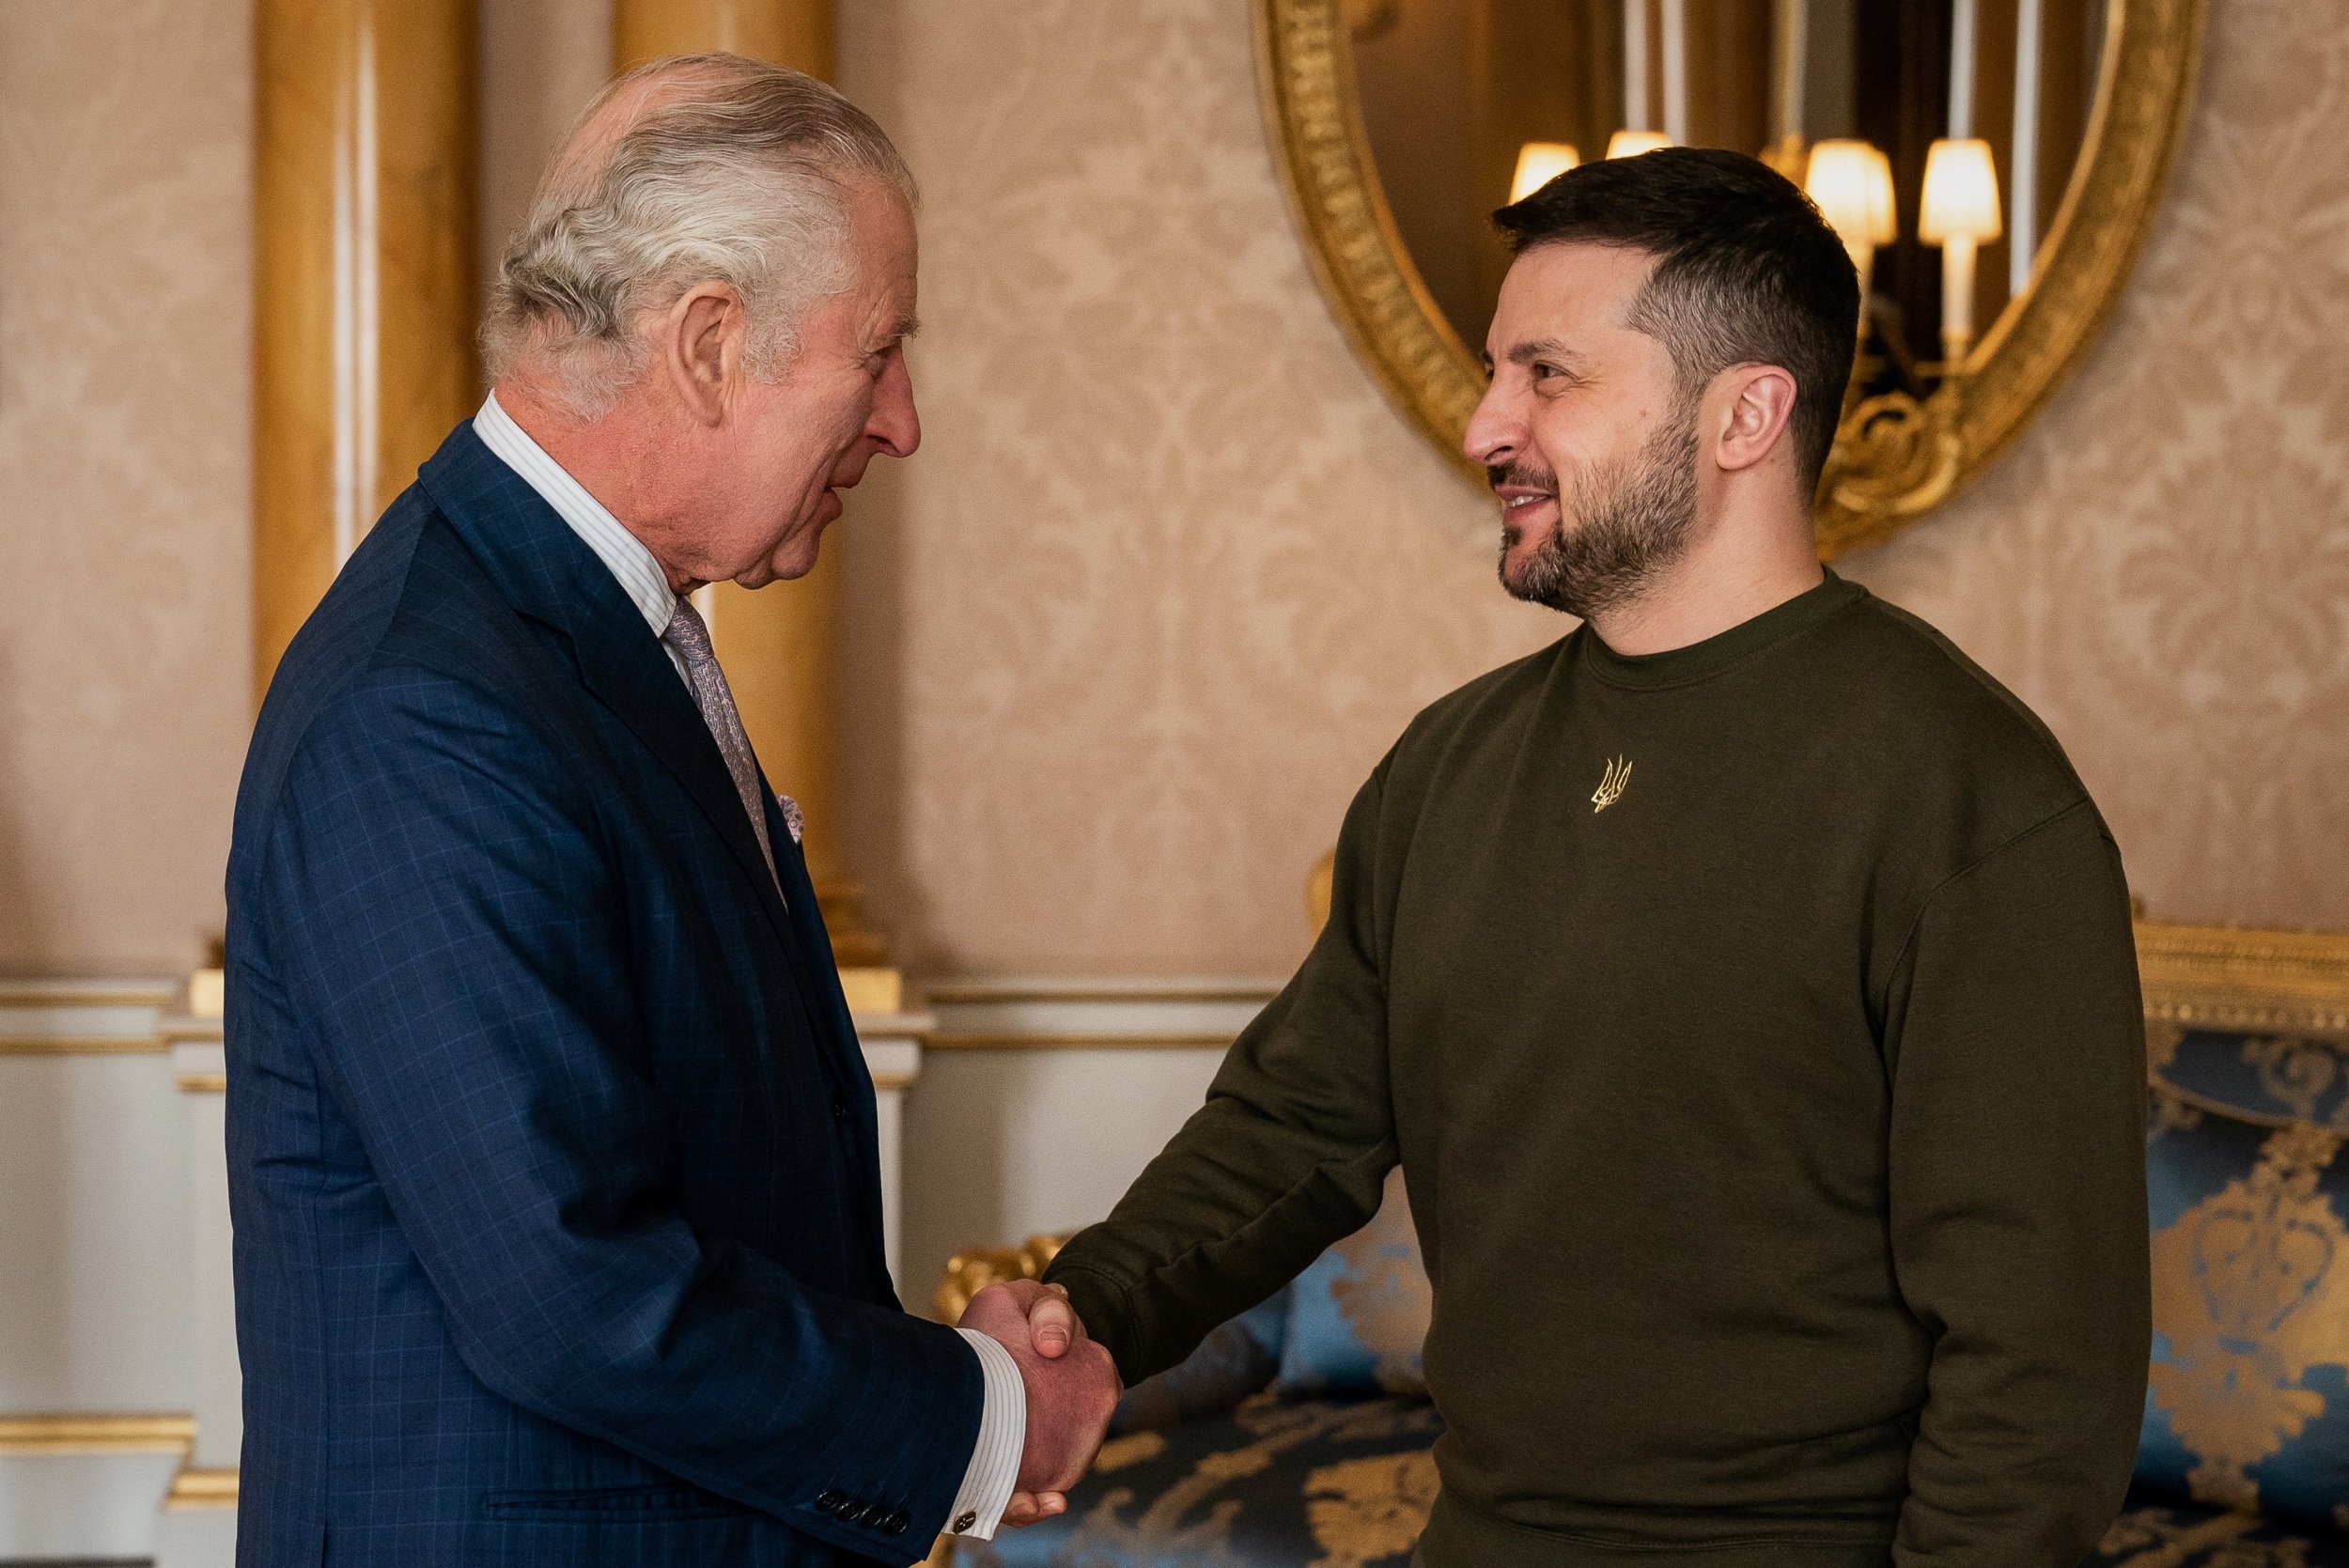  King Charles III holds an audience with Ukrainian President Volodymyr Zelensky at Buckingham Palace, London, during his first visit to the UK since the Russian invasion of Ukraine. Picture date: Wednesday February 8, 2023. Picture by: Aaron Chown/PA